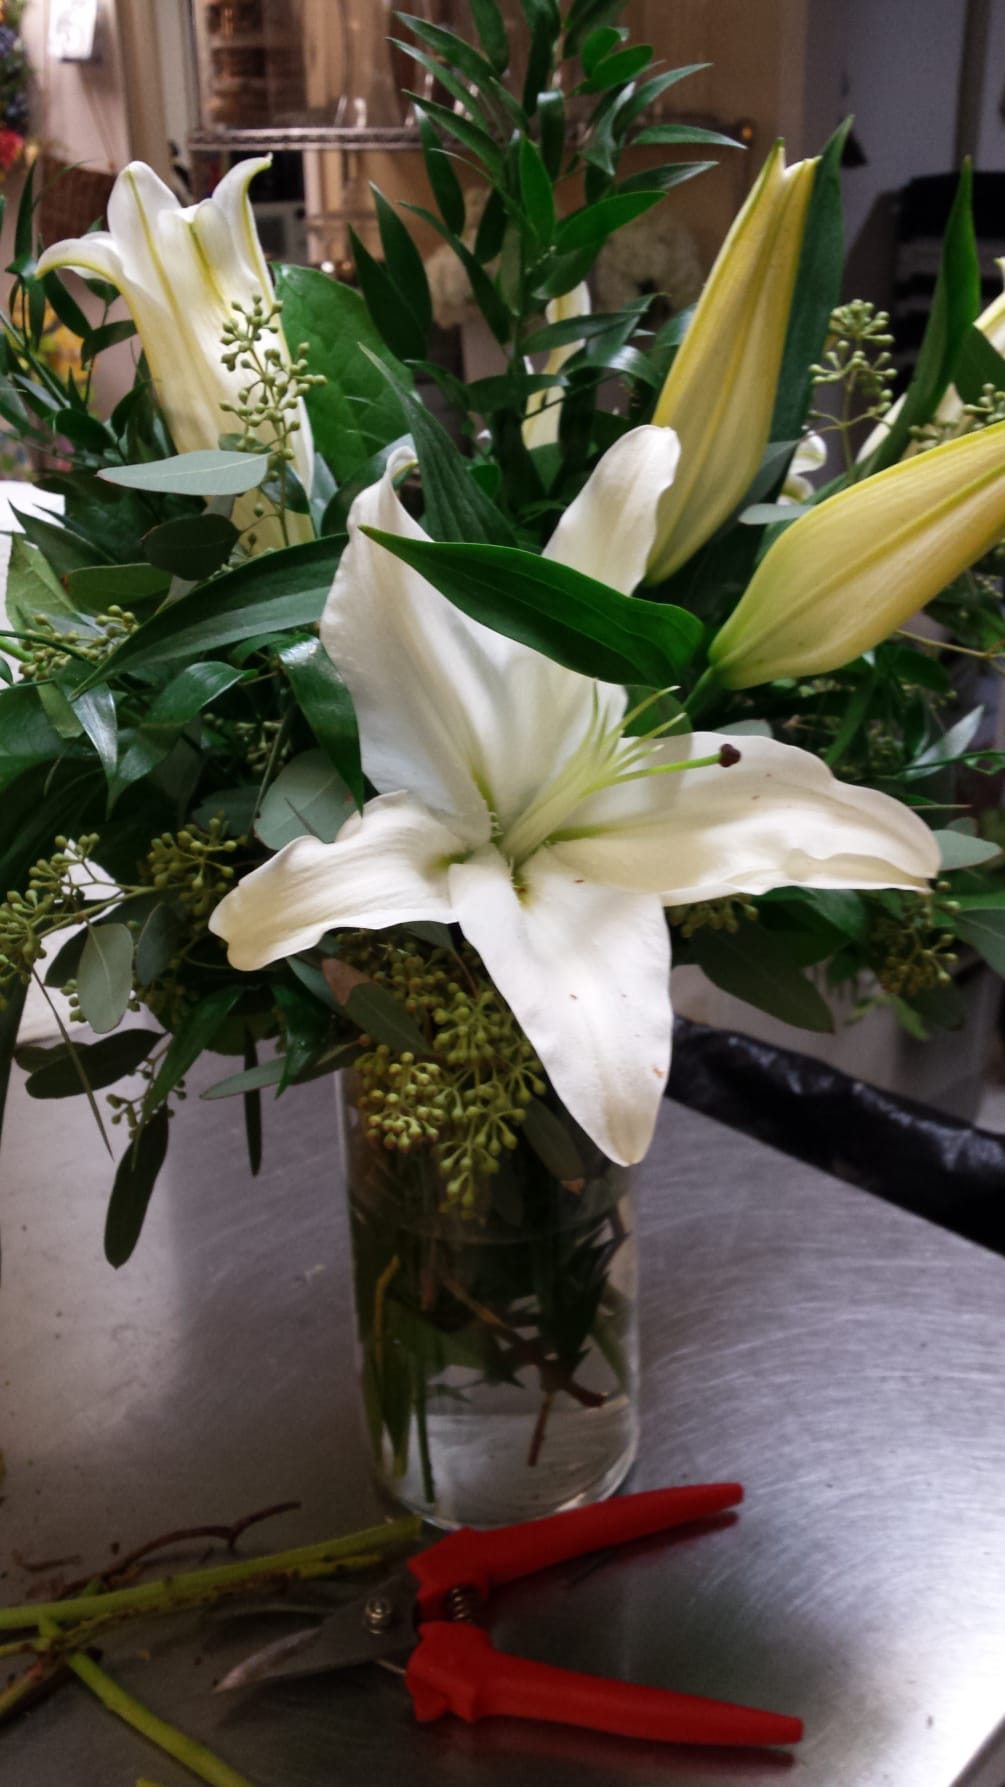 Long lasting and fragrant white lilies